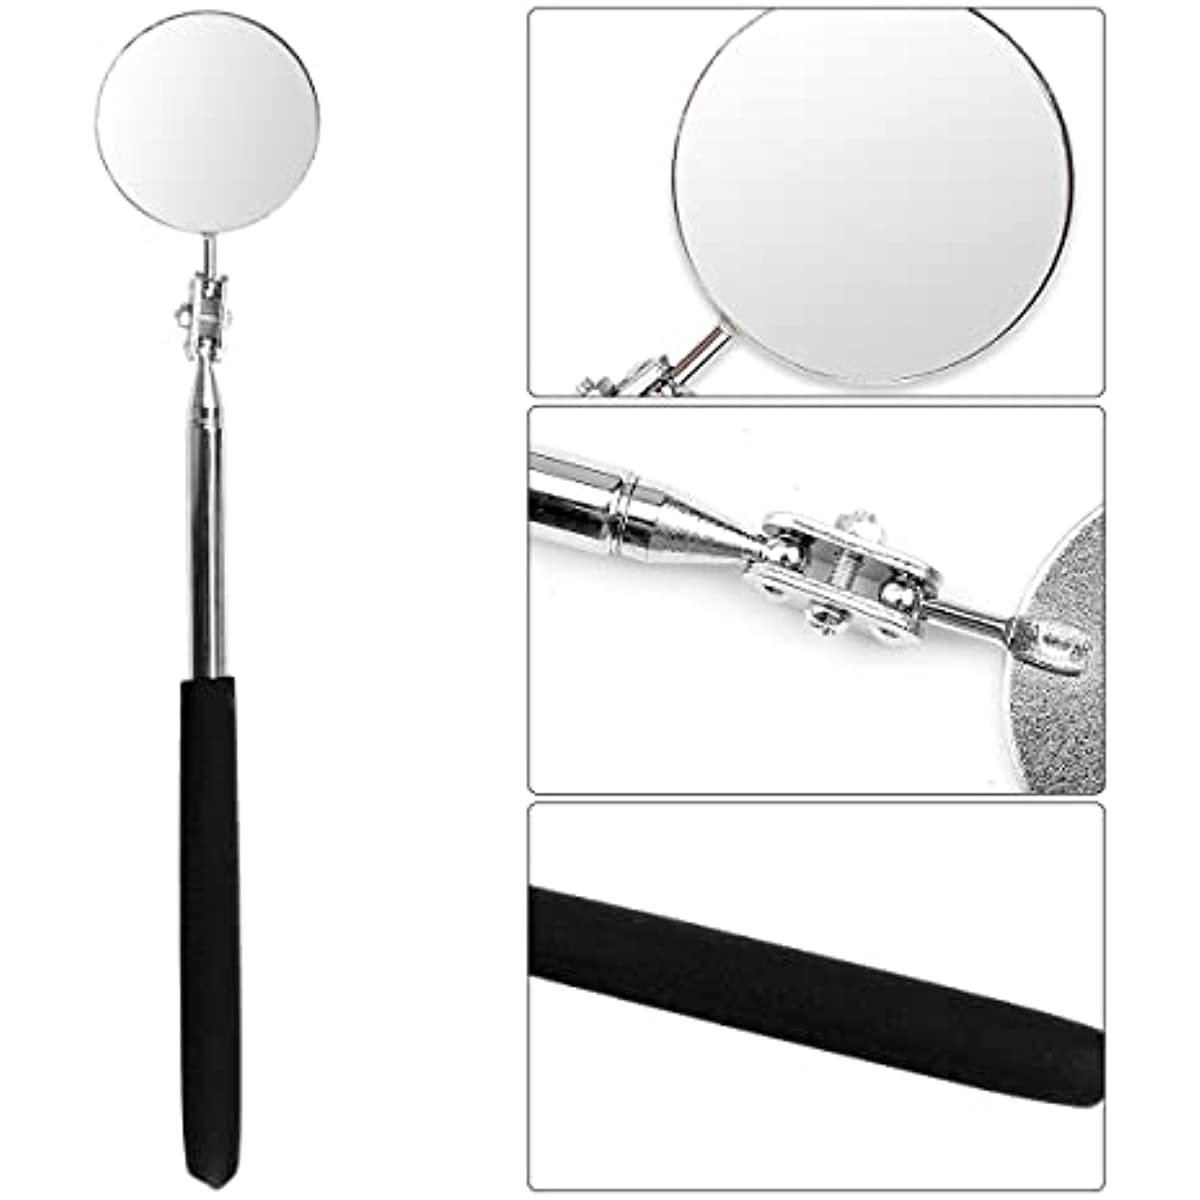 Windshield Repair Glass Inspection Mirror - 3x Magnification